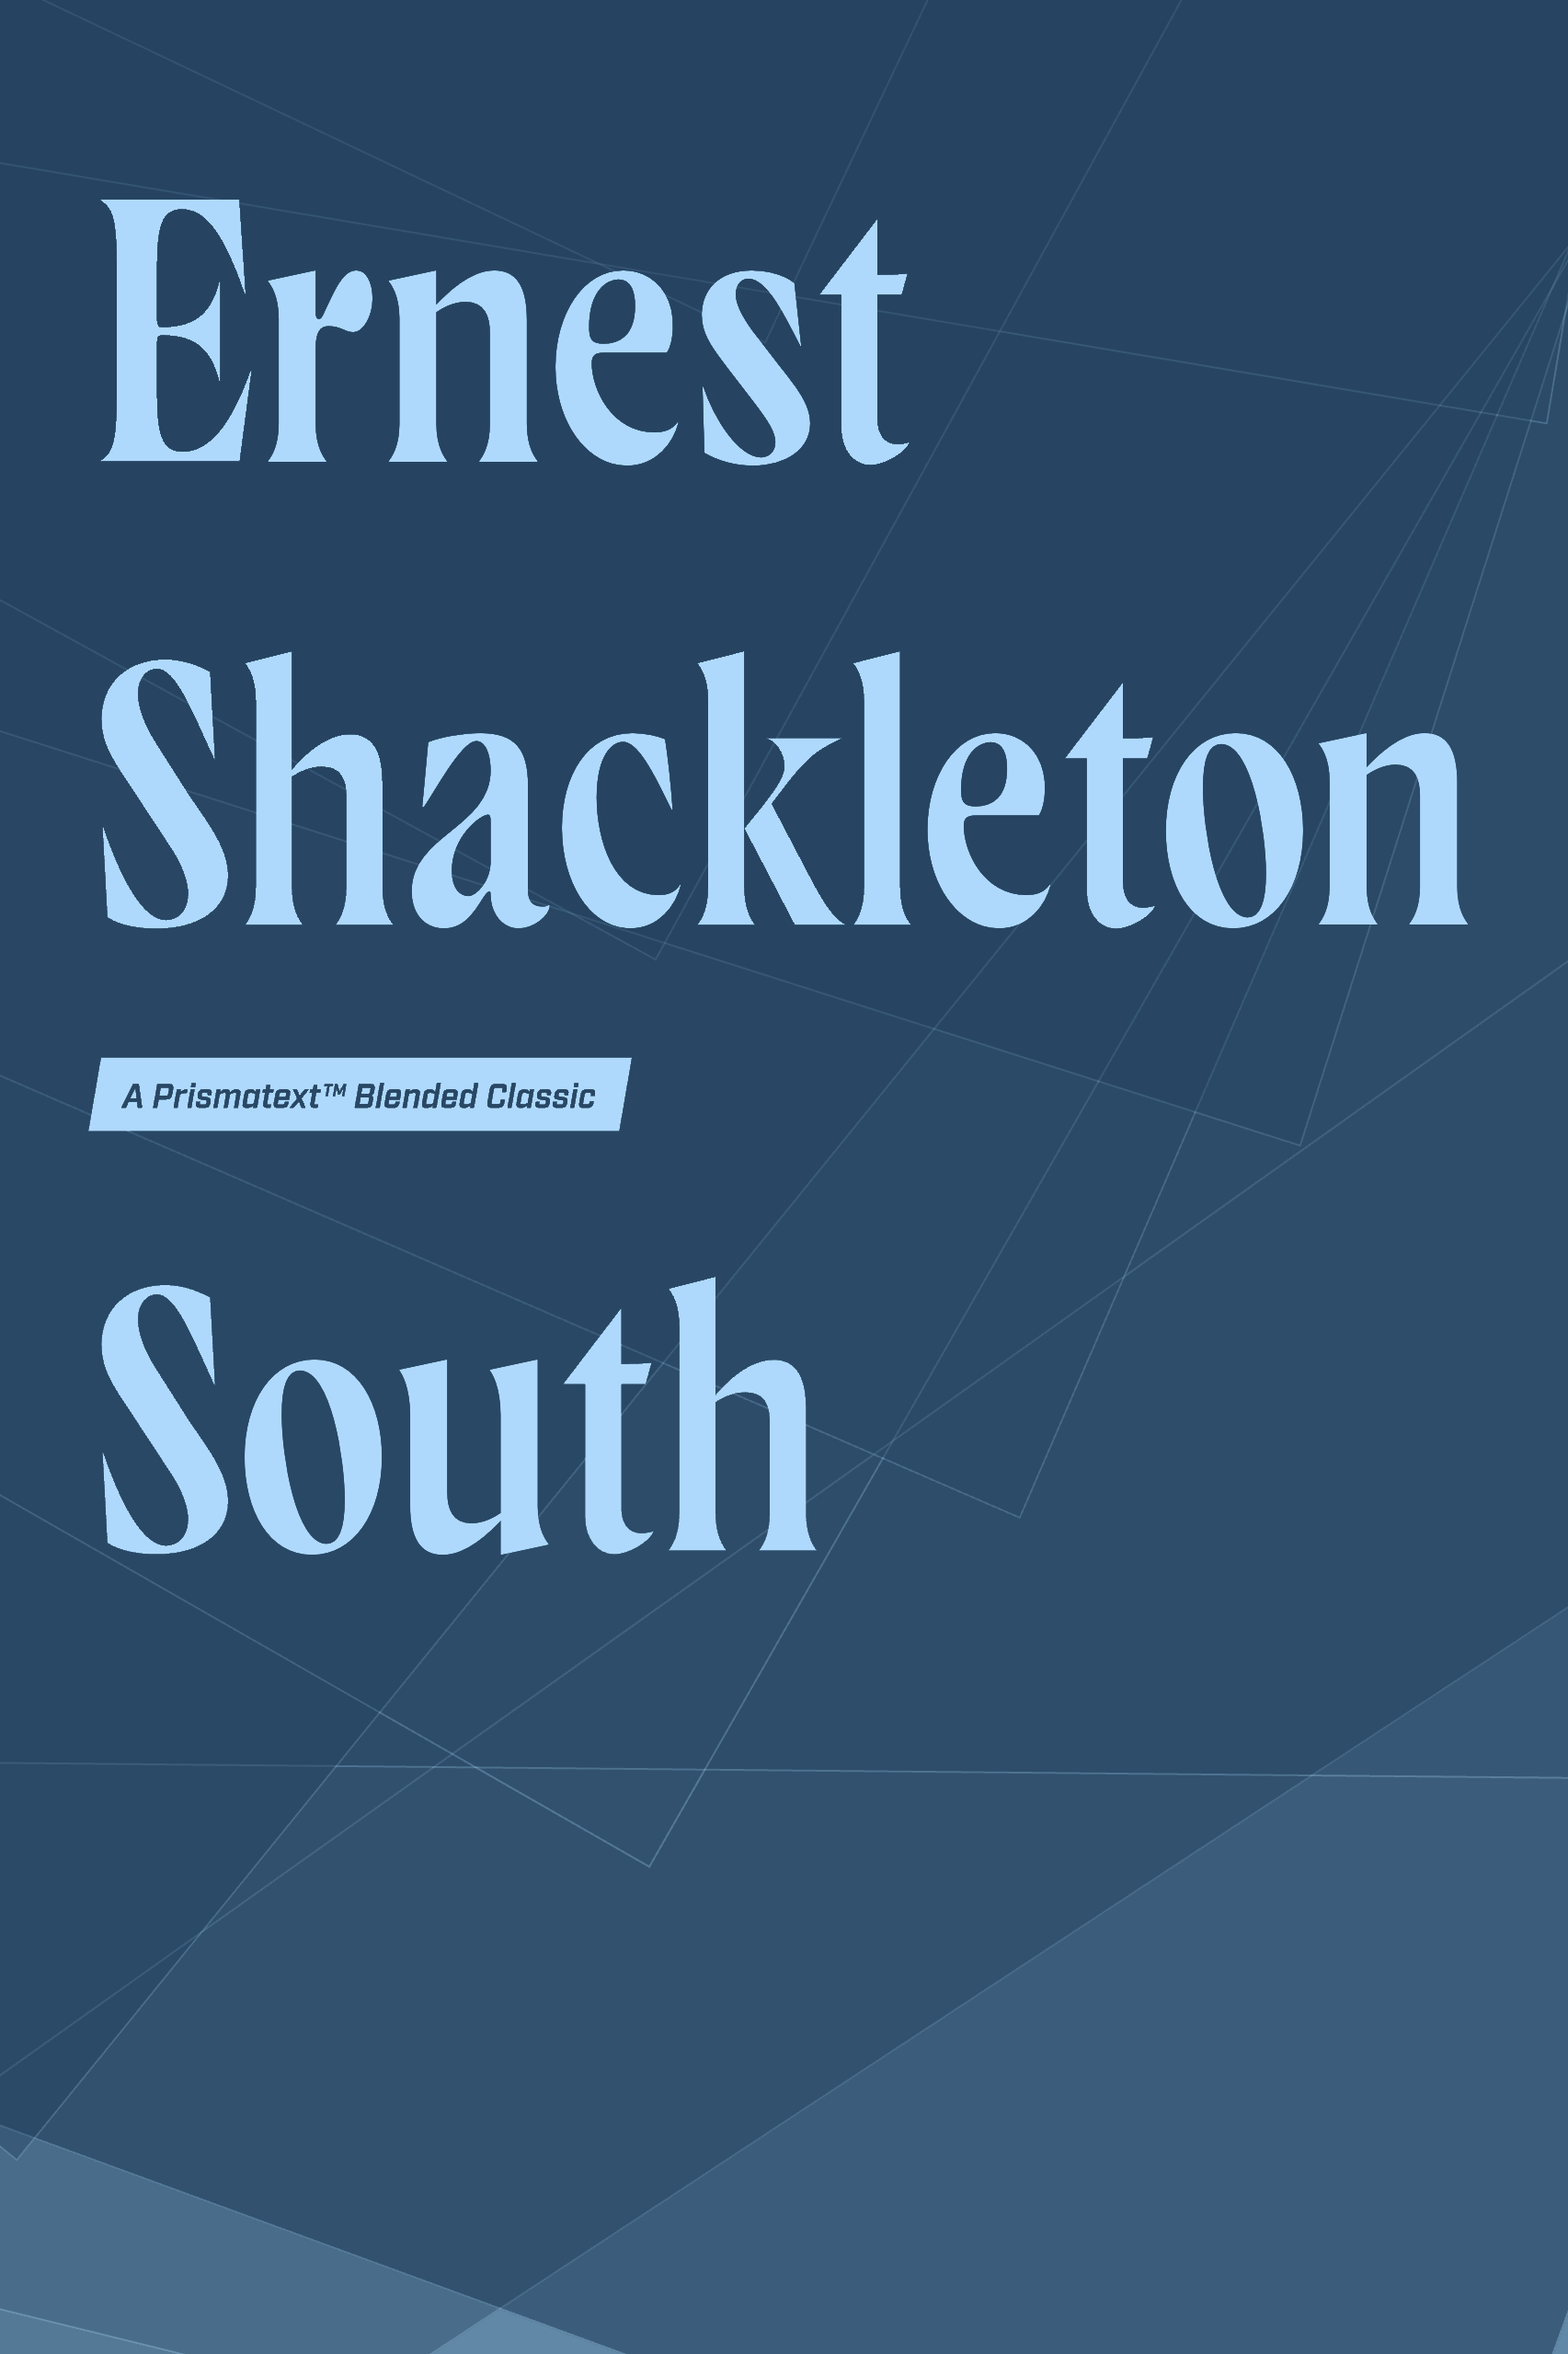 South!: The Story of Shackleton’s Last Expedition 1914–1917